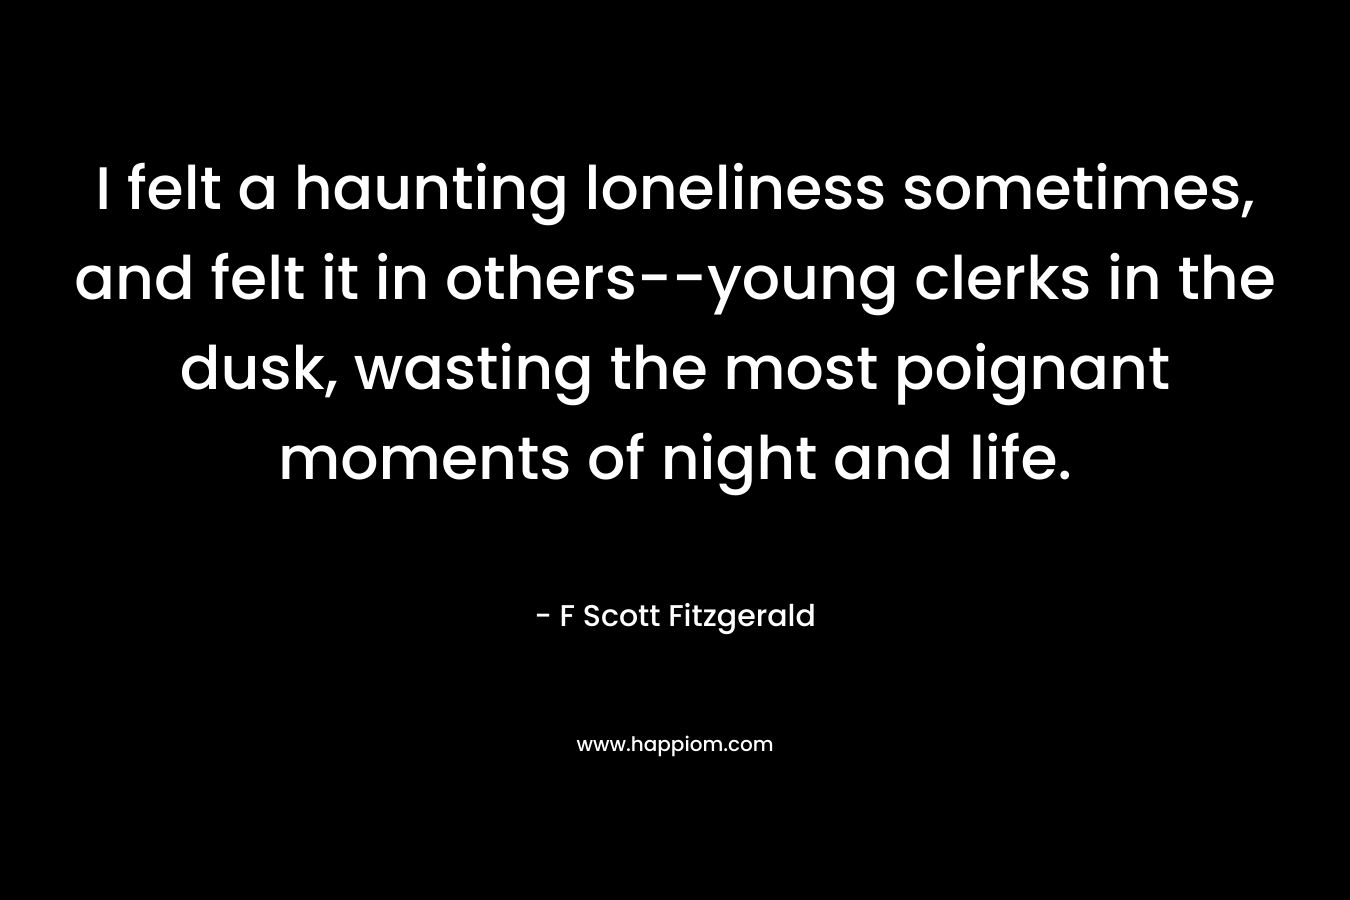 I felt a haunting loneliness sometimes, and felt it in others--young clerks in the dusk, wasting the most poignant moments of night and life.